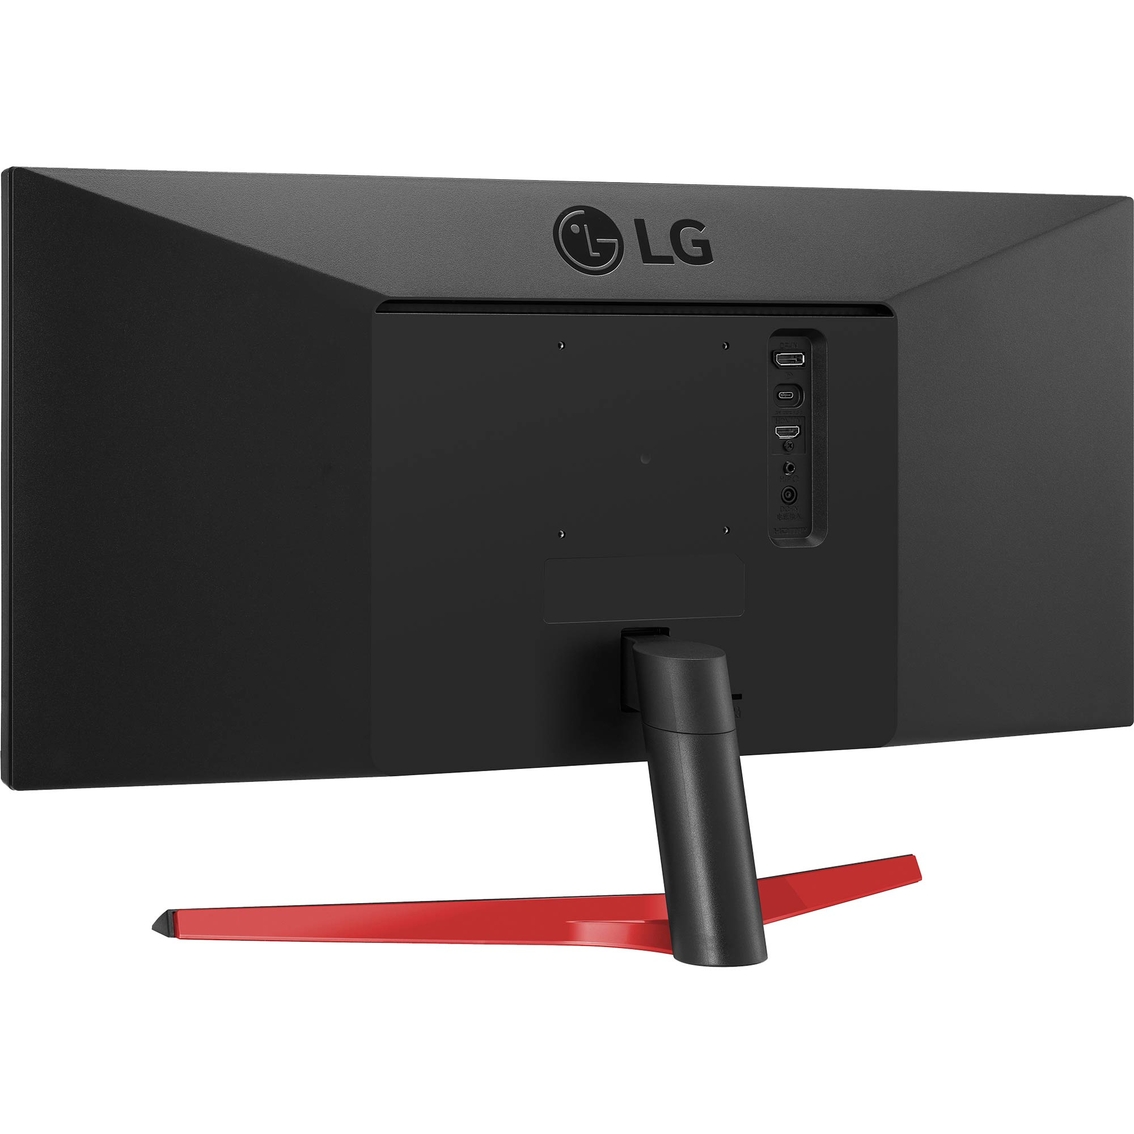 LG 29 in. UltraWide FHD HDR FreeSync Monitor 29WP60G-B - Image 7 of 7